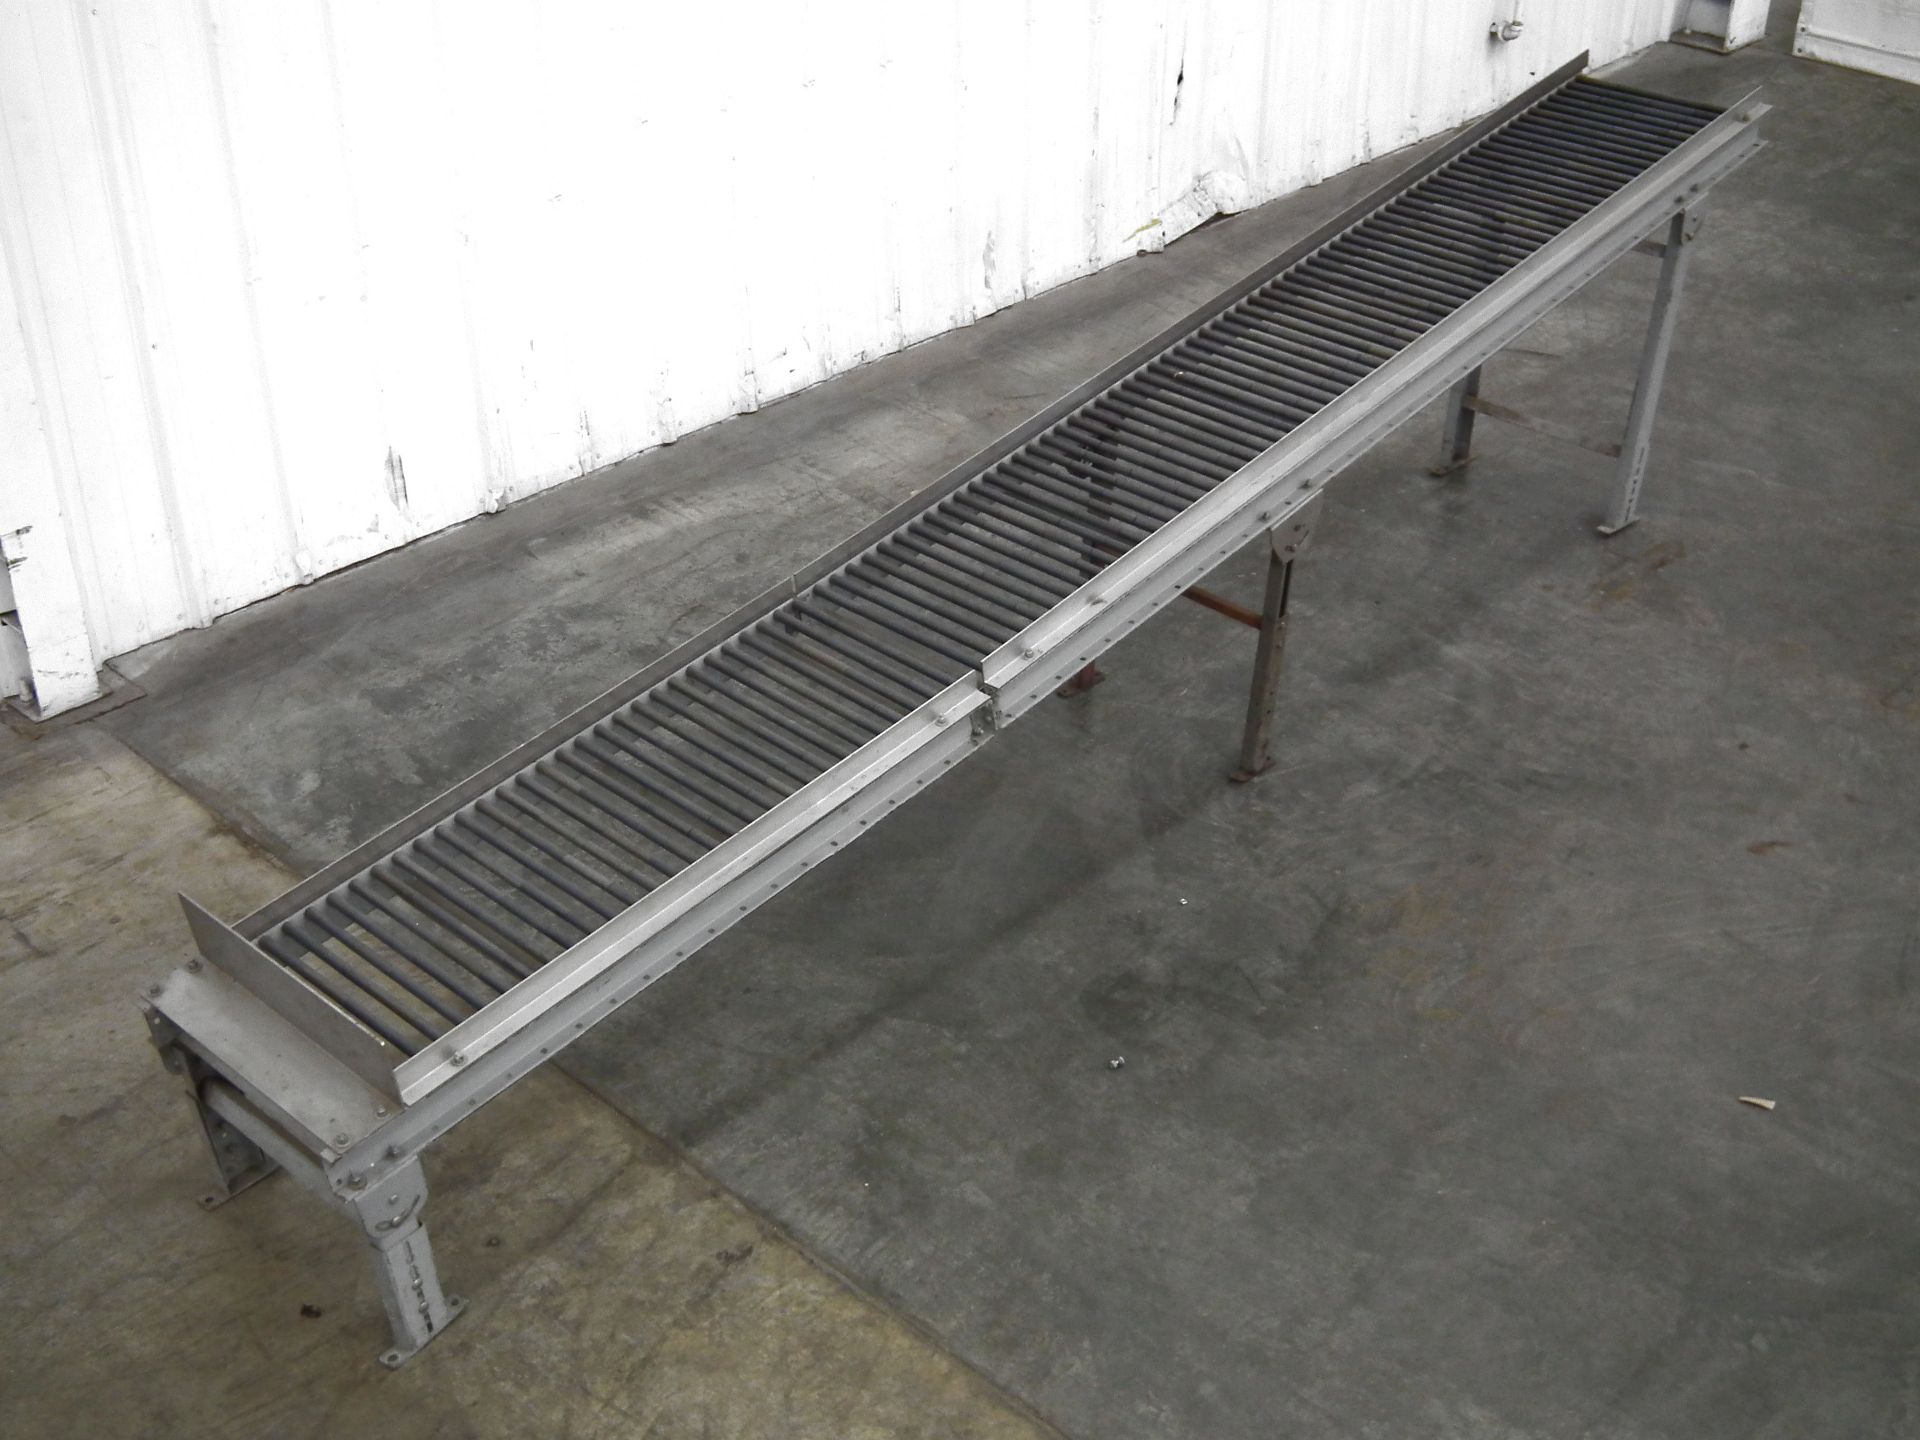 20 Inch Wide x 173 Inches Long Gravity Conveyor B3685 - Image 3 of 6